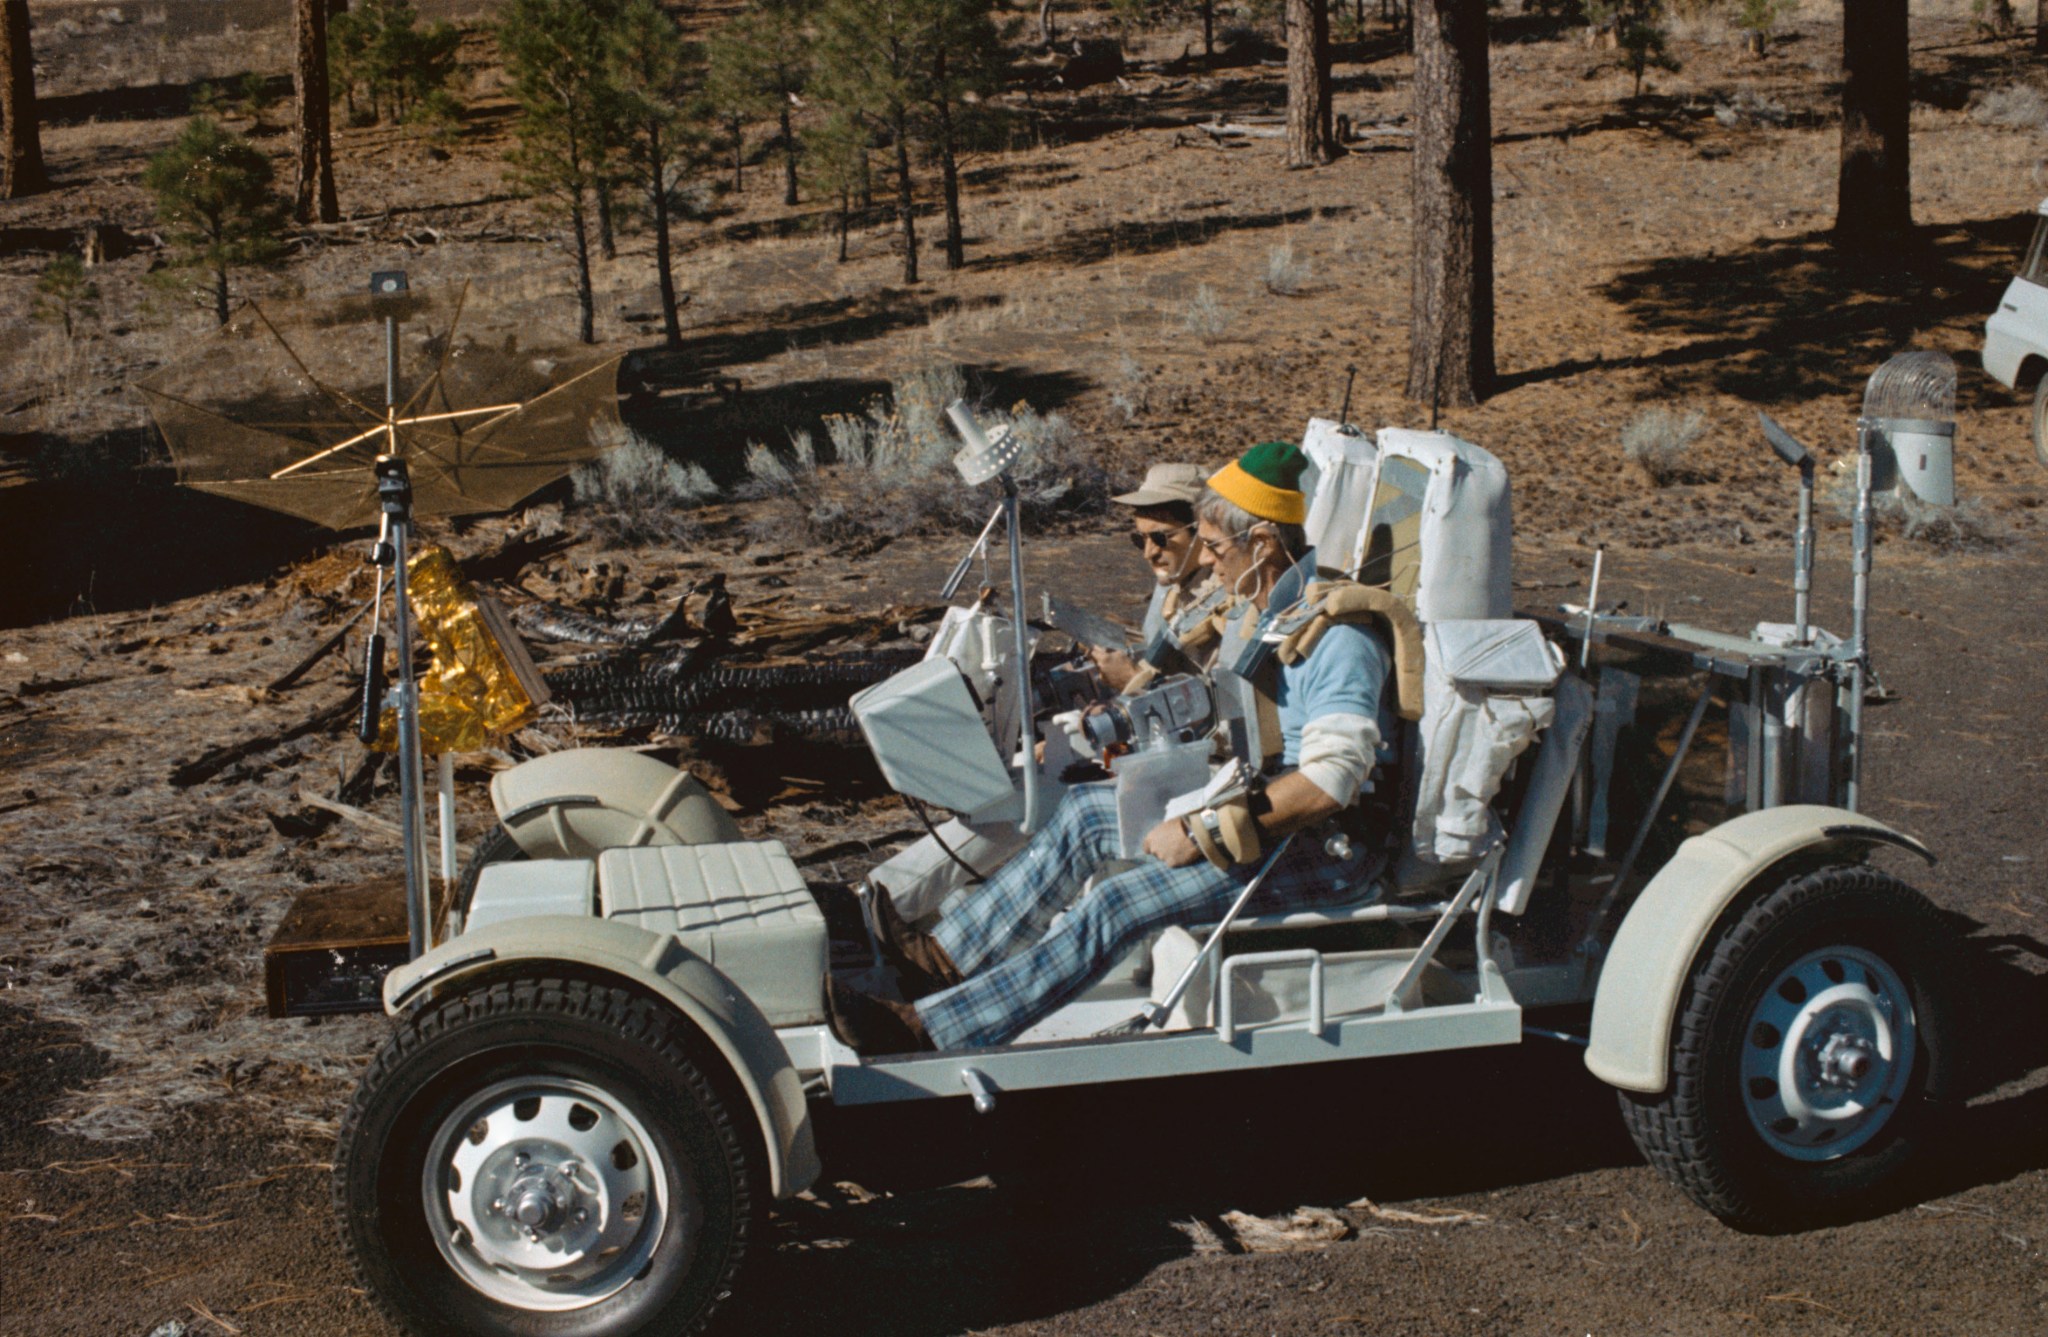 Two people are sitting in a large vehicle with no roof, strapped into large, rectangular seats. The vehicle is sitting on brown soil. Spruce trees are in the background. The two people are looking at a box in front of them. Antennas stretch up from different parts of the vehicle.